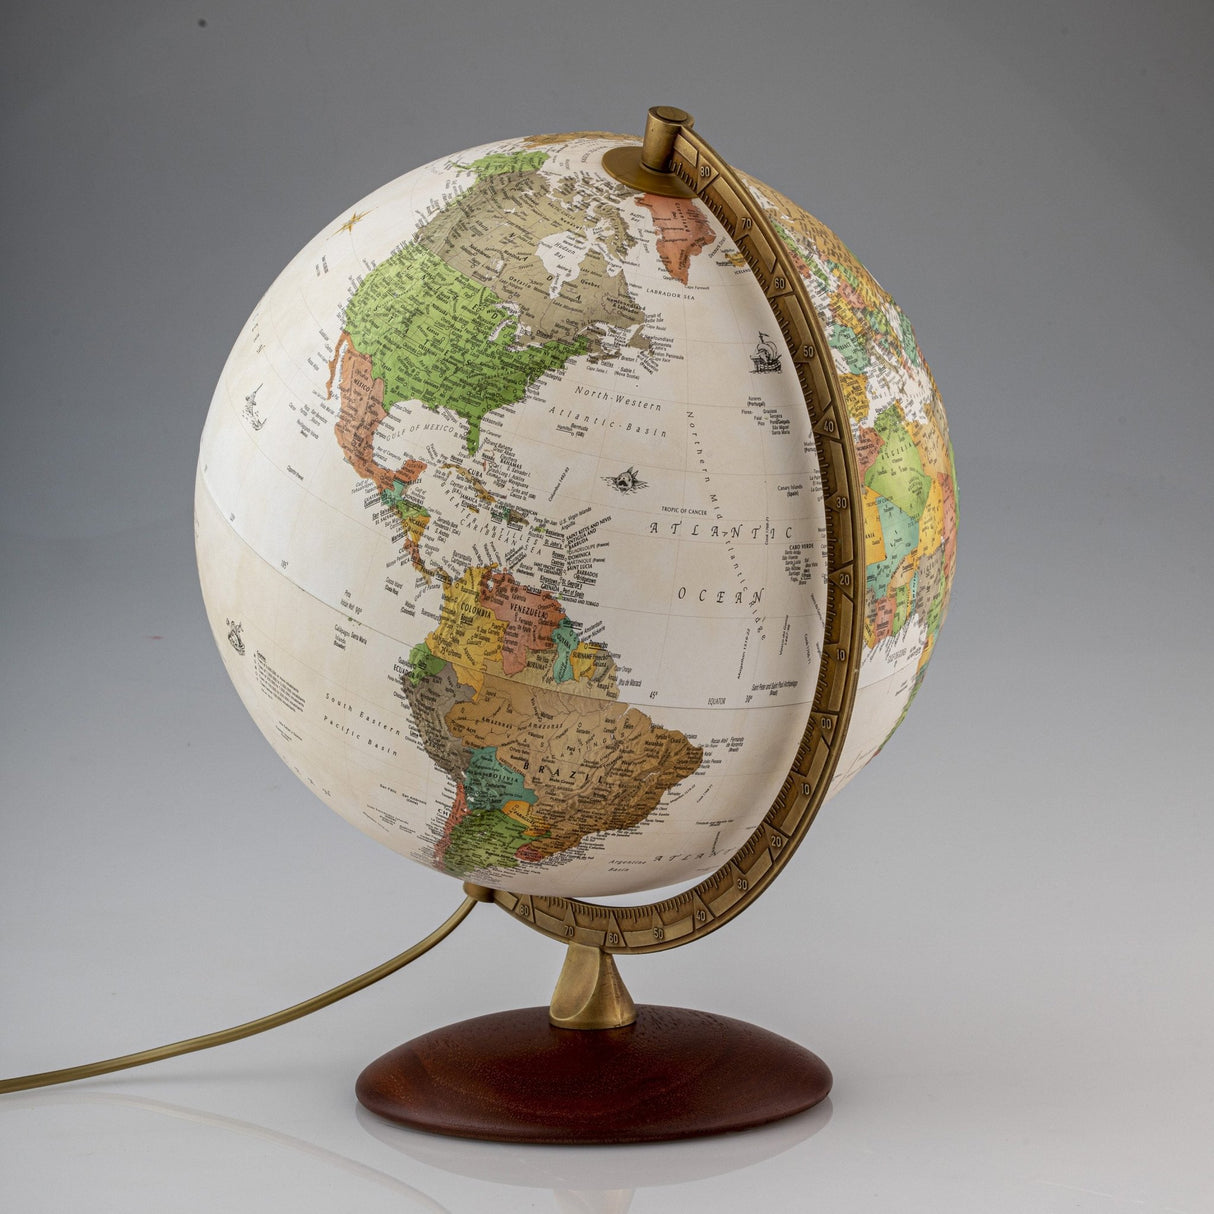 Athens Raised Relief Globe - WP21108 - Ultimate Globes